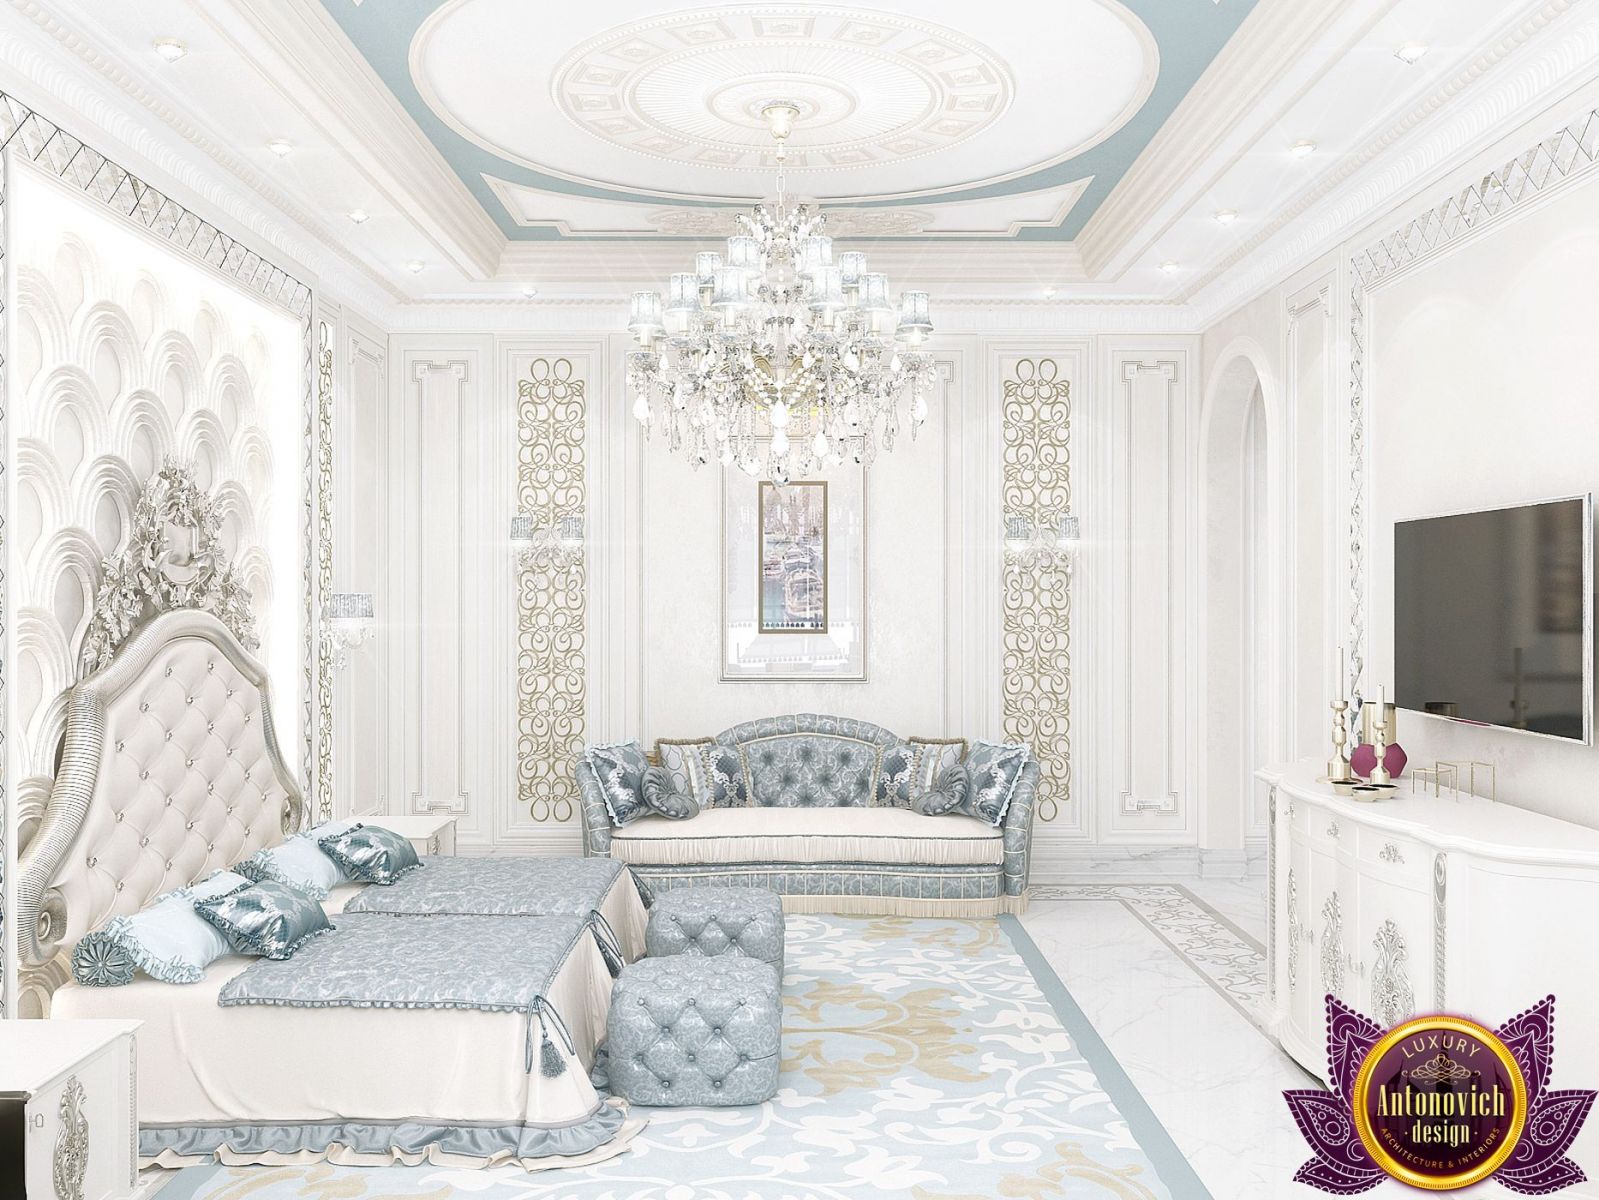 Exquisite bedroom design with a grand canopy bed and stylish accents